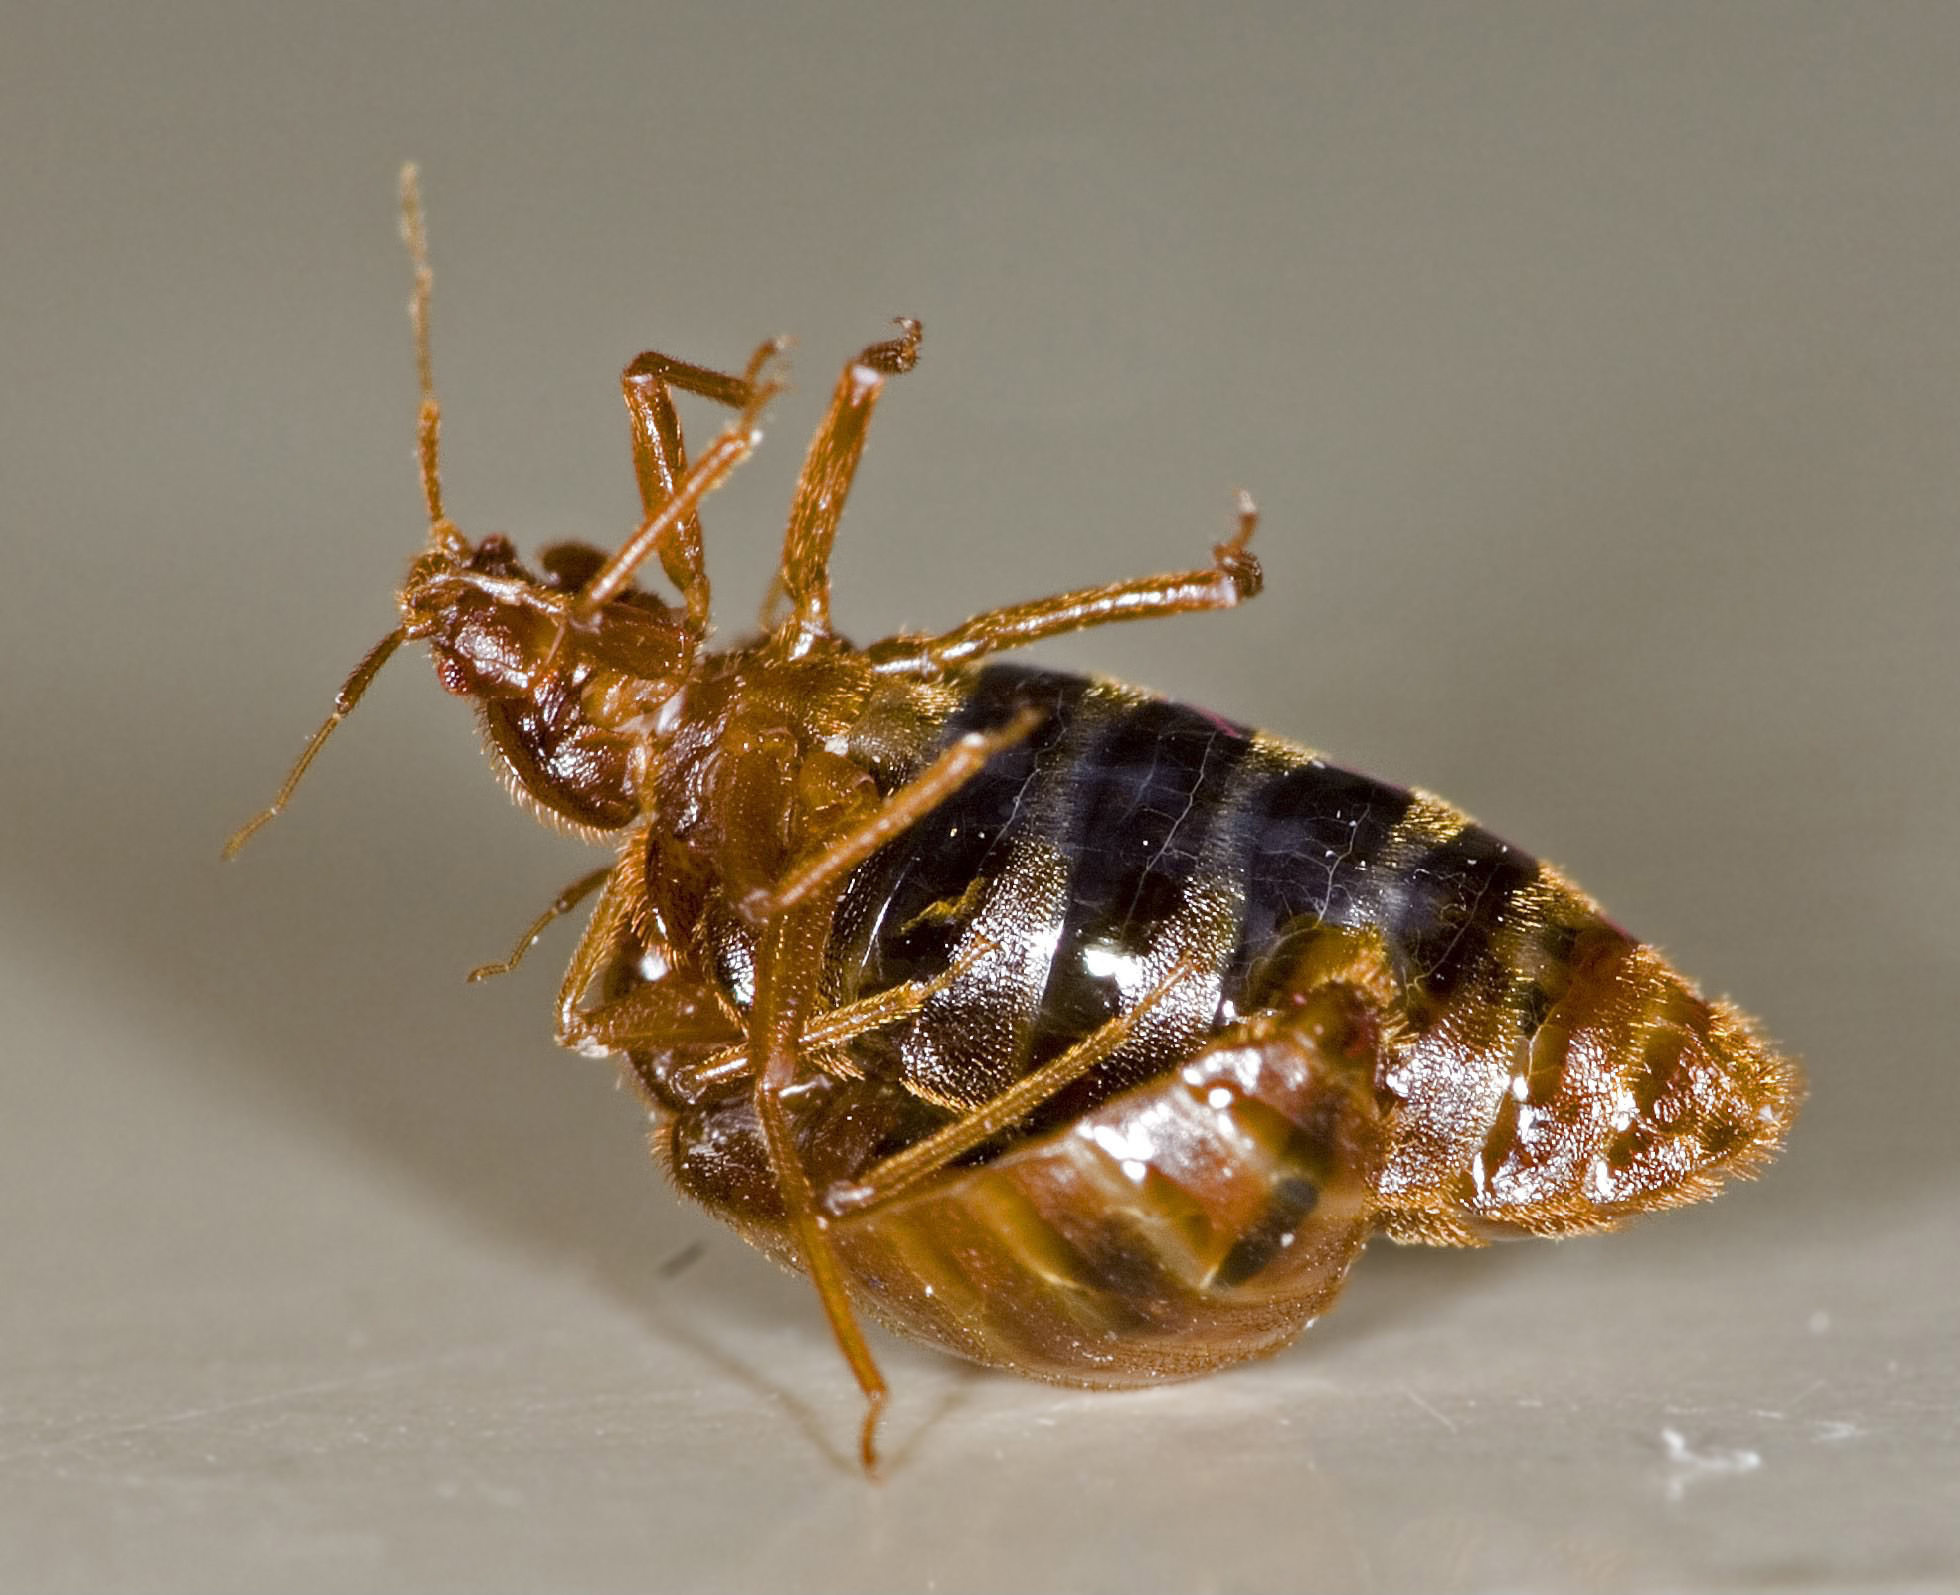 Bed Bugs Will Infest Any Property: Let Us Get Rid of Them for Good